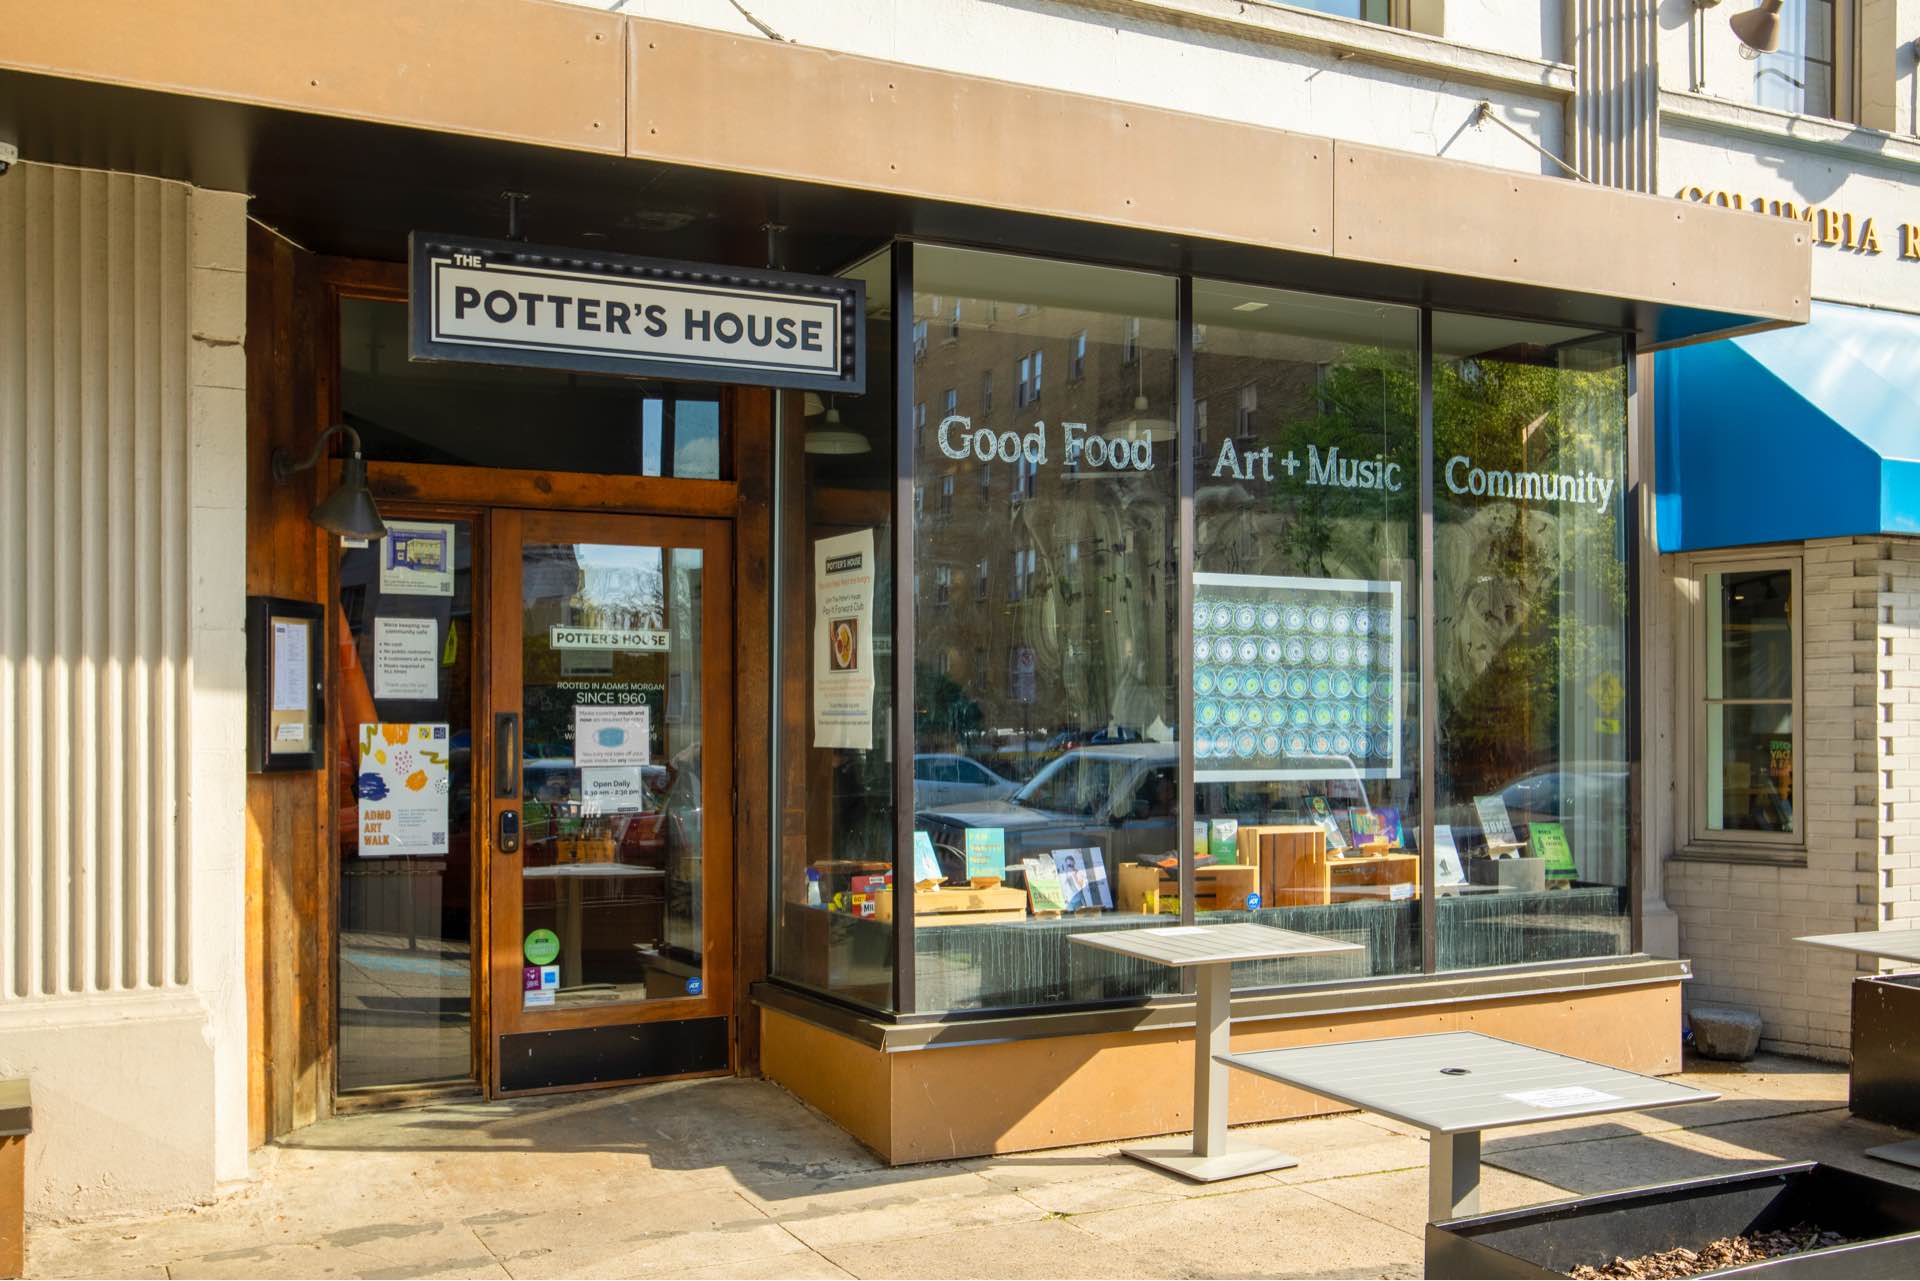 The Potter's House historic bookstore and café